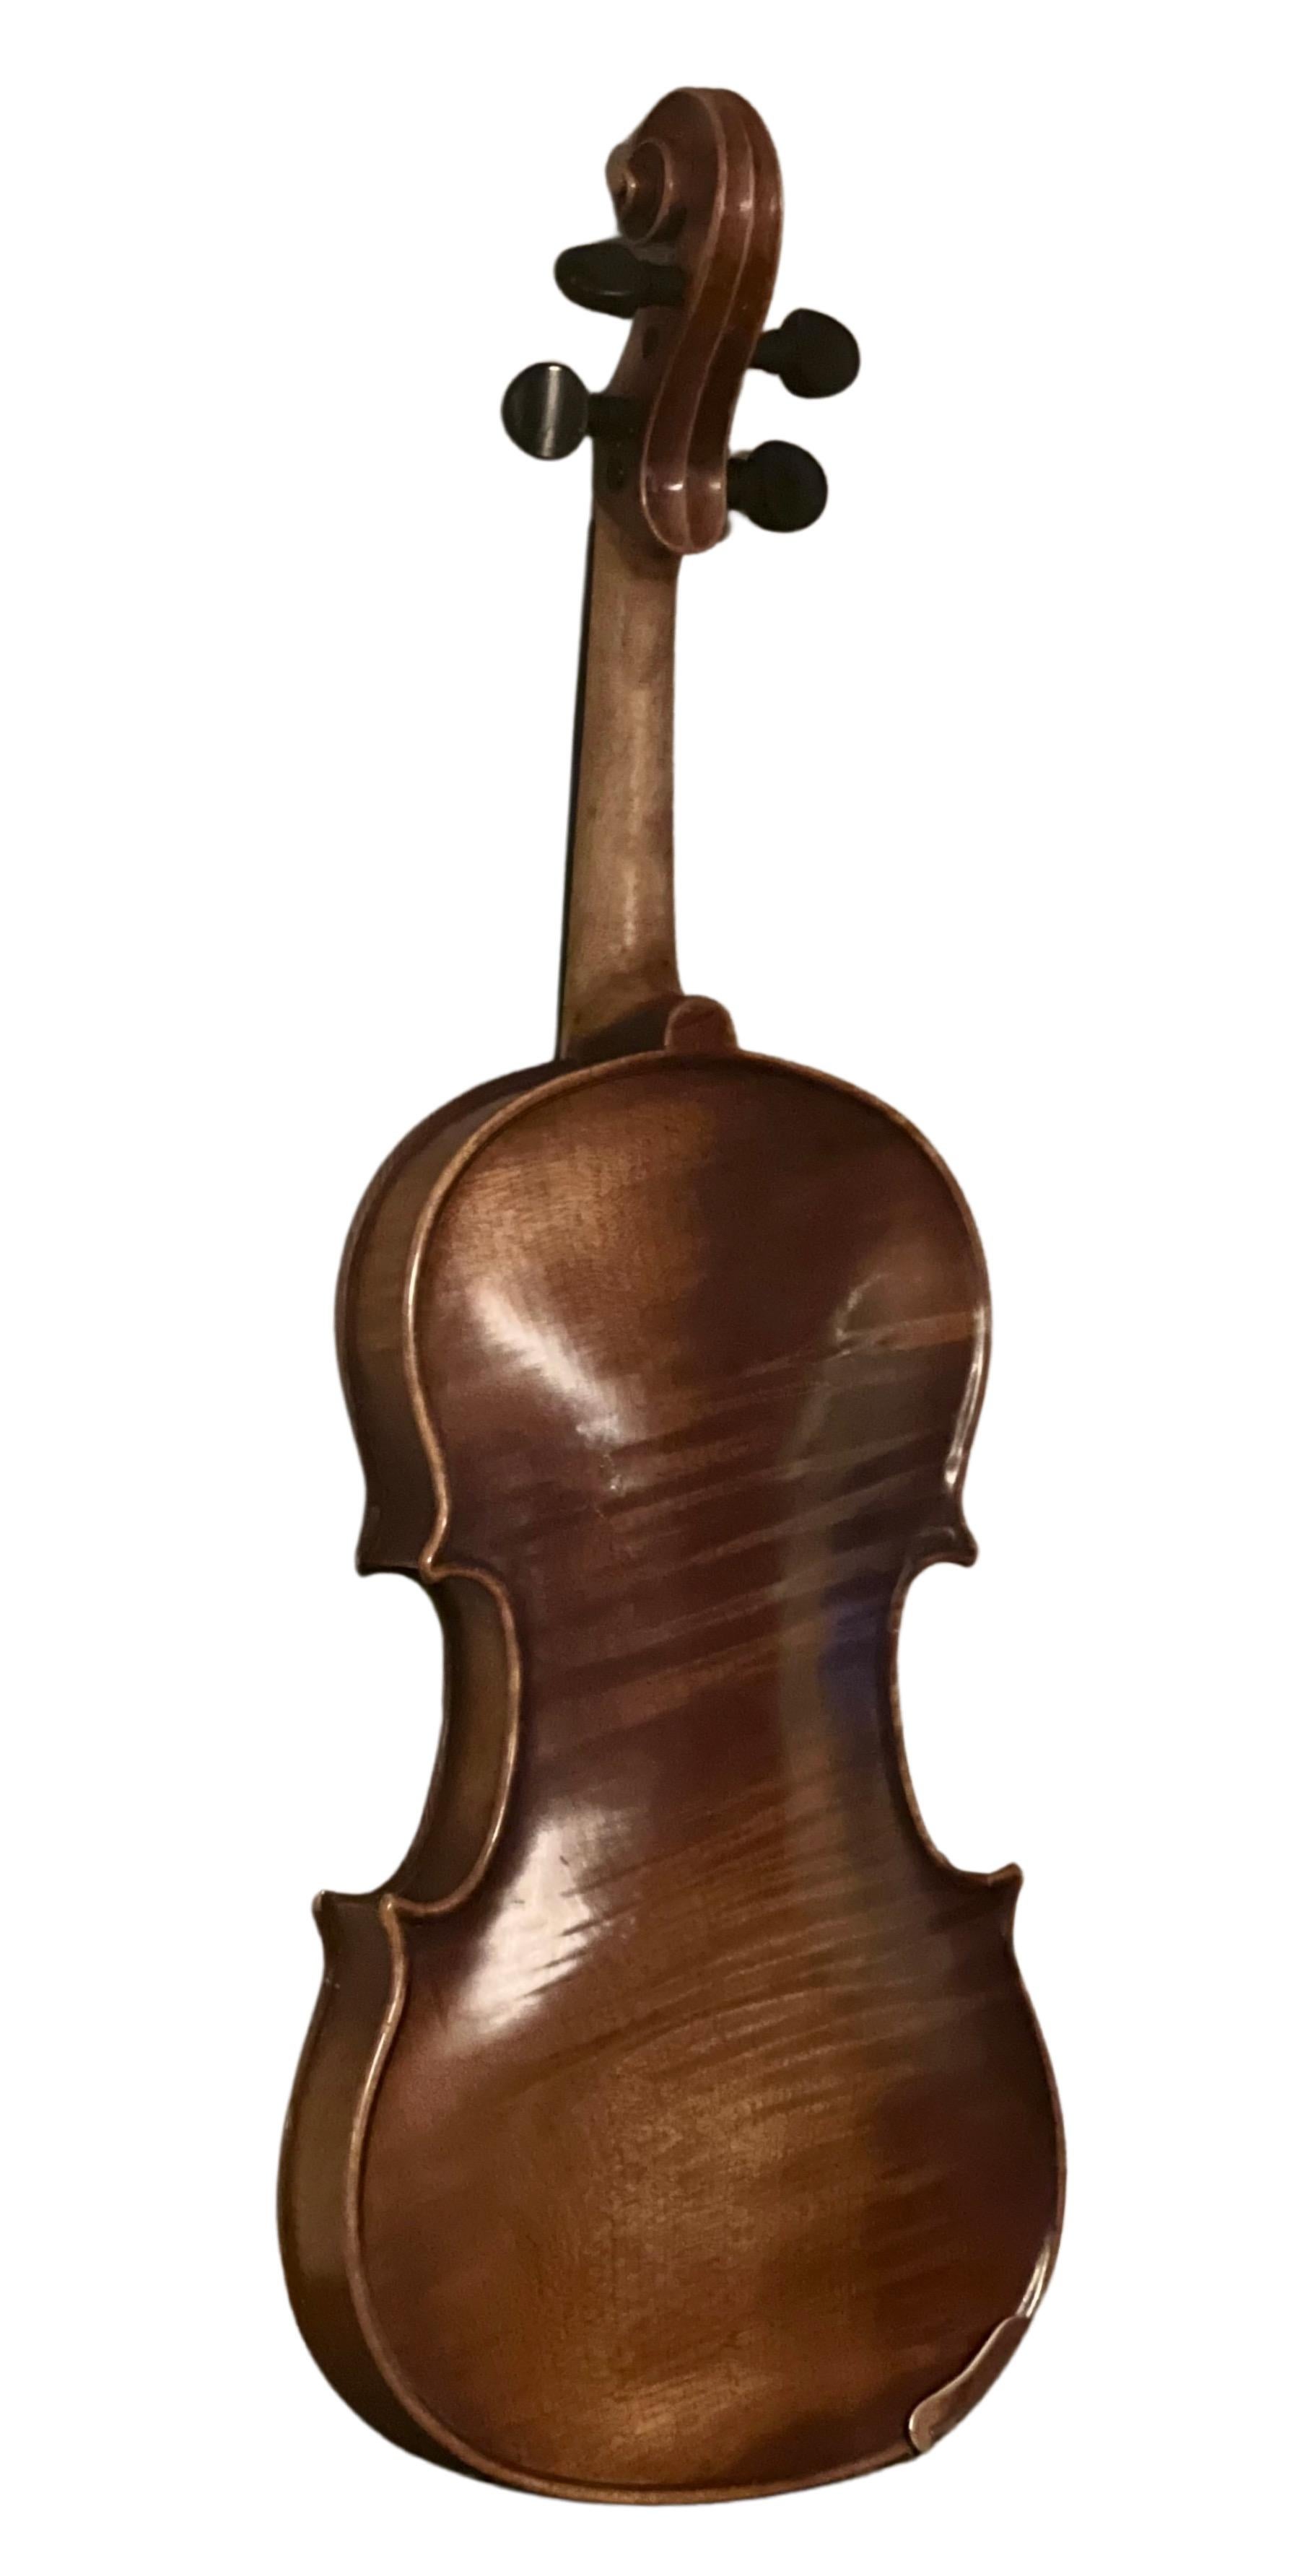 1970 3/4 E.R. Pfretzschner Hand-Crafted Violin in the Style of A. Stradivarius en vente 2